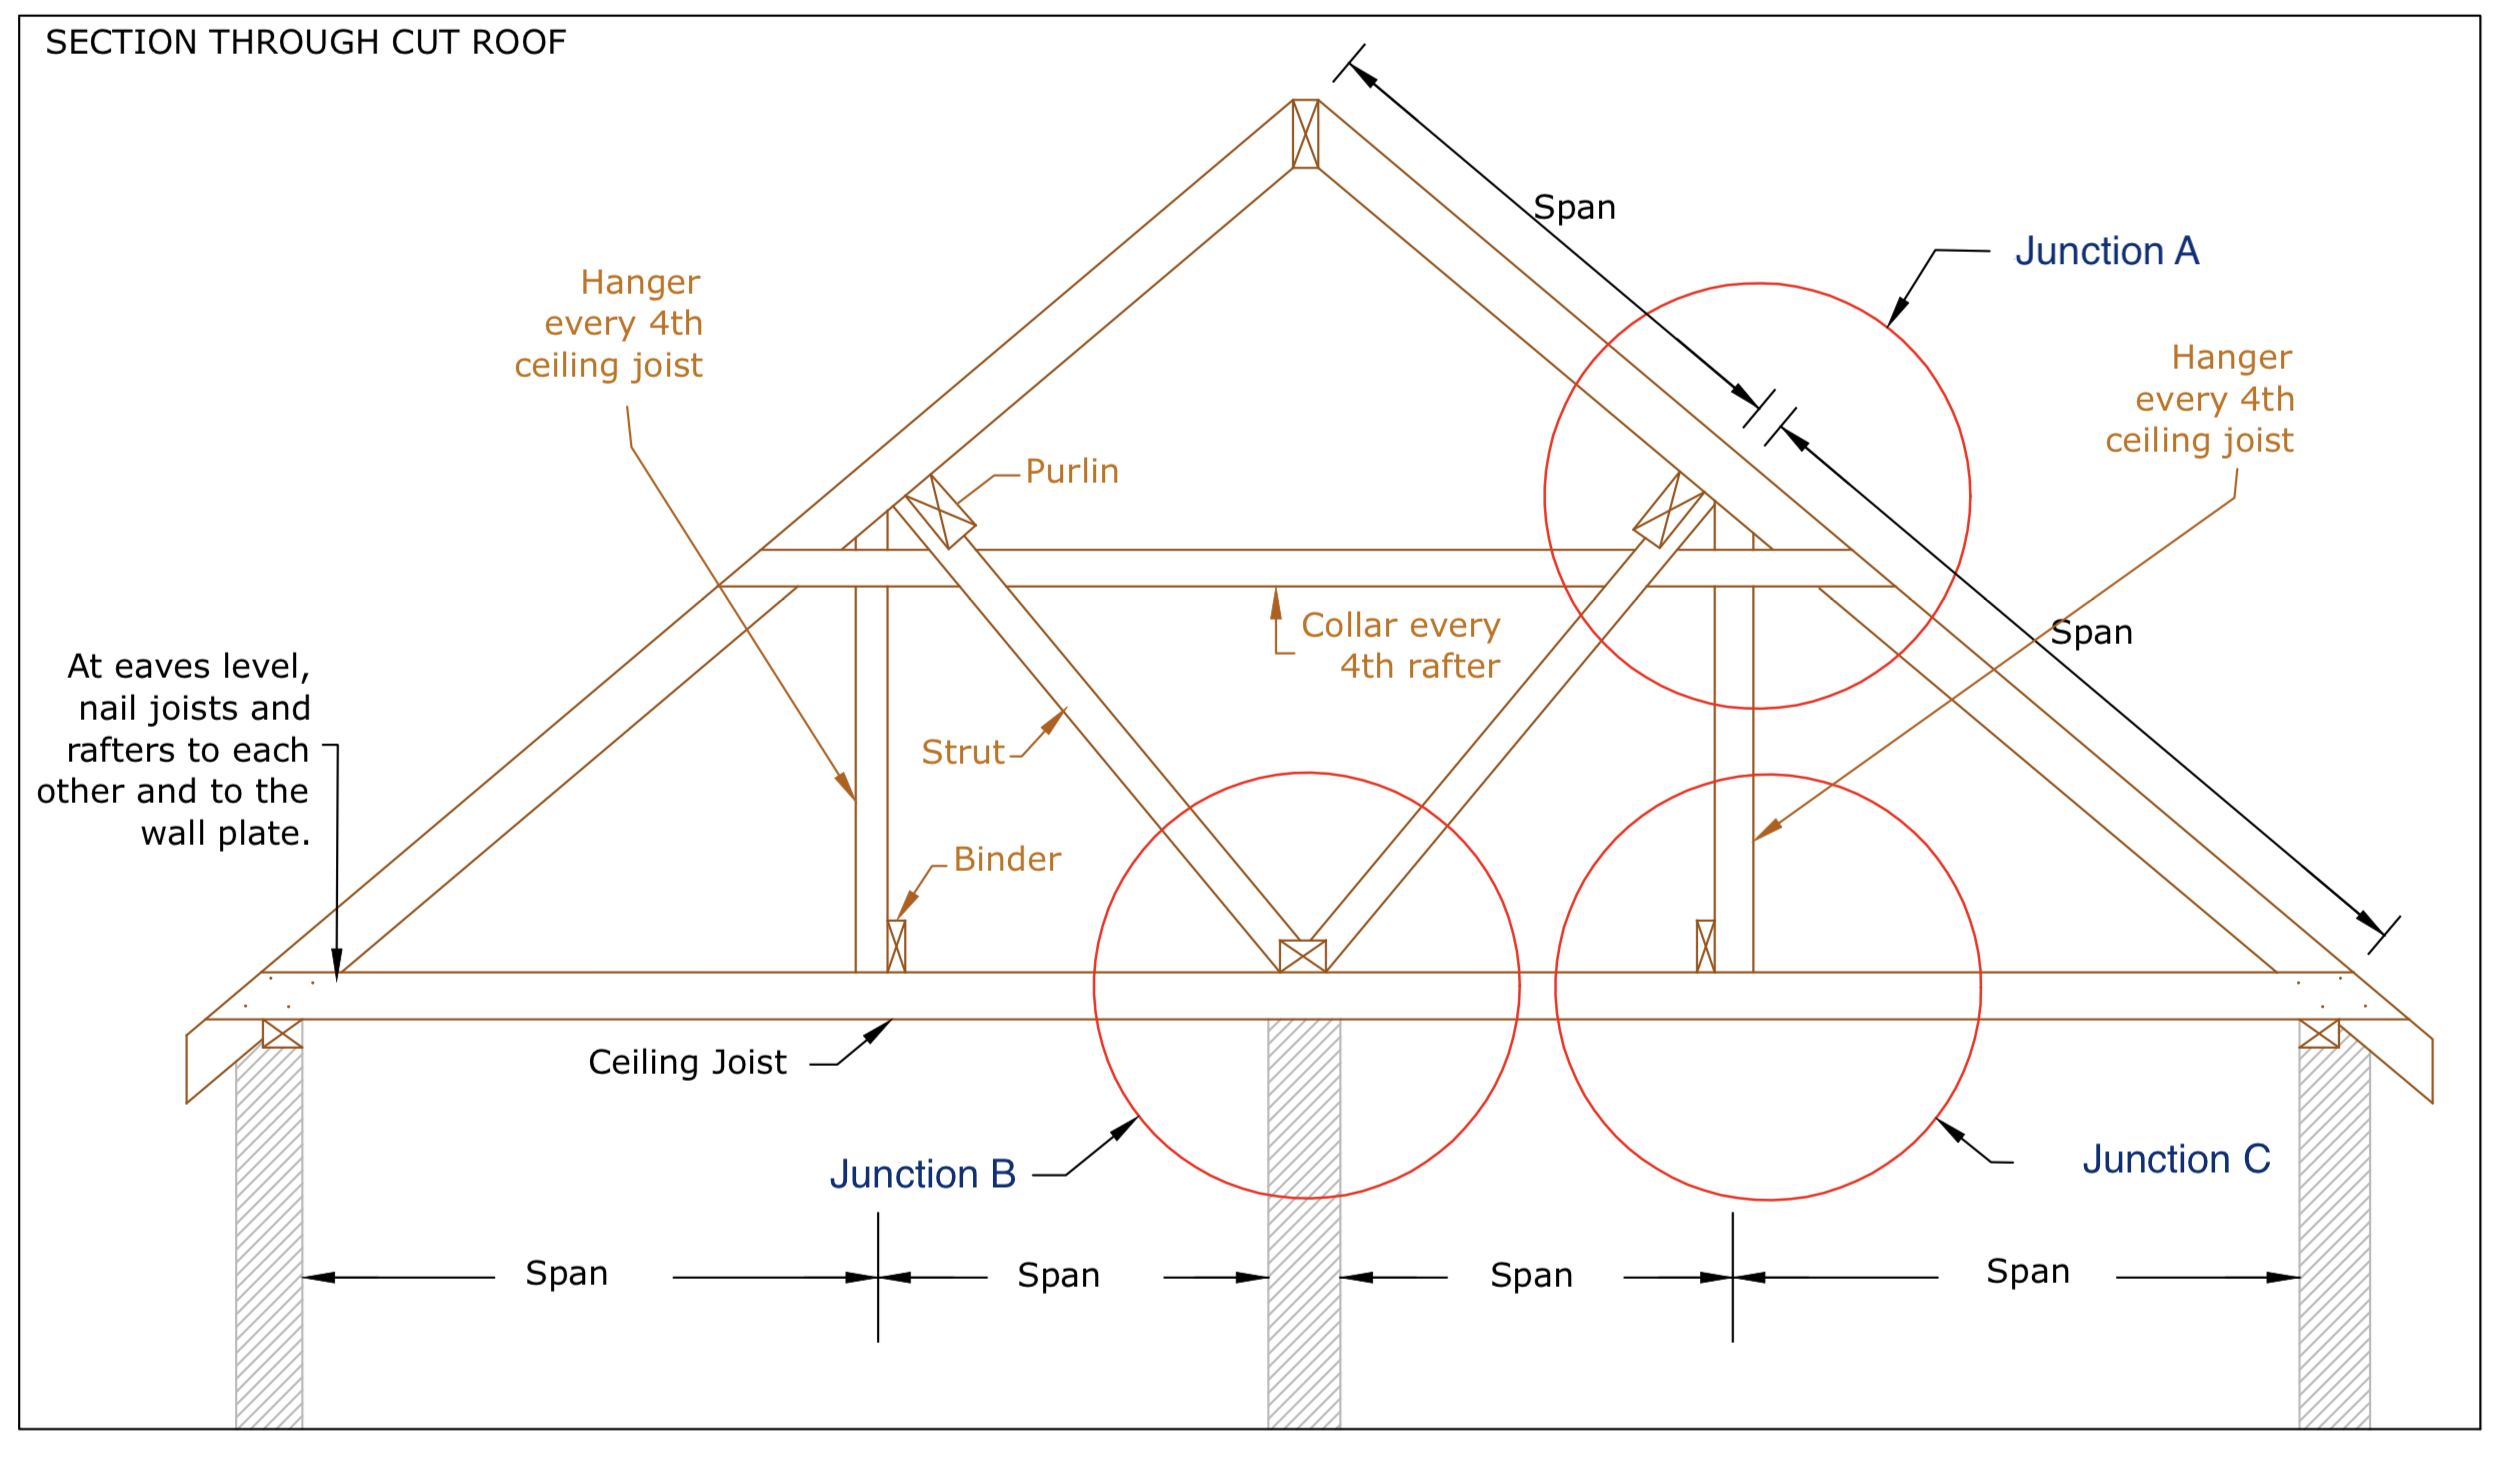 Diagram D38 - Section through a traditional cut roof